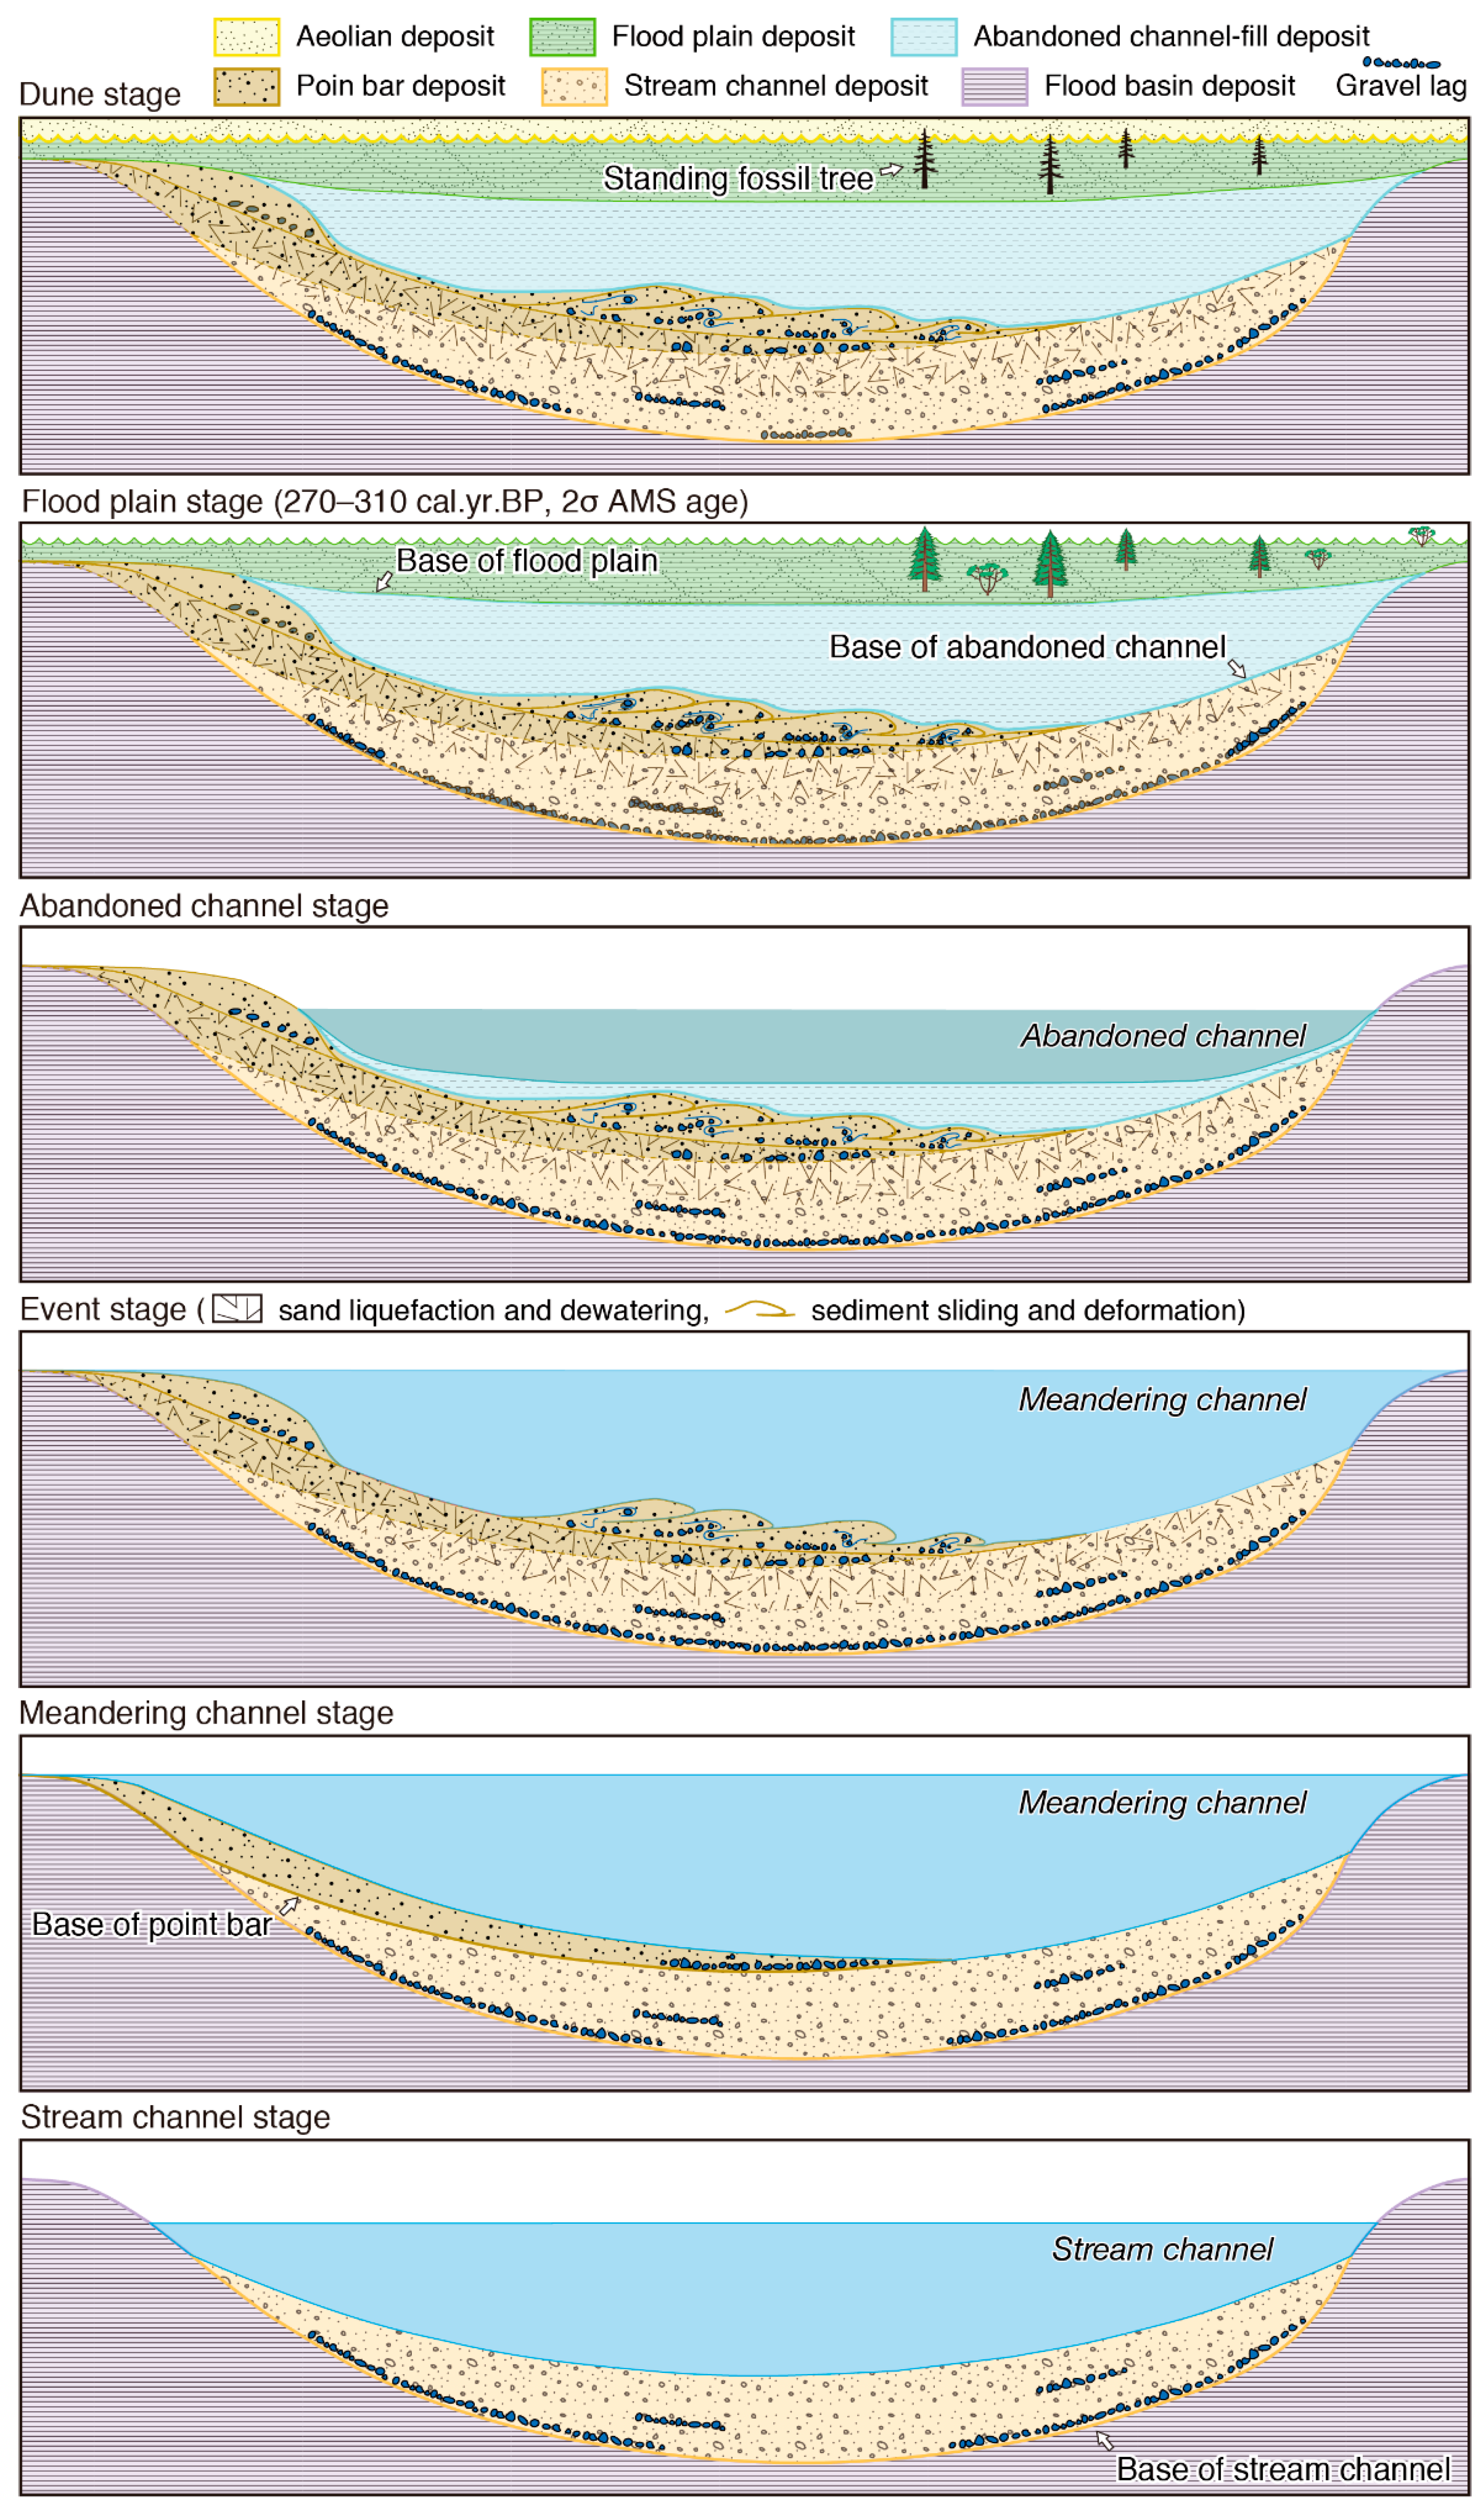 Geosciences | Free Full-Text | Eustatic, Climatic and Tectonic Controls on  the Evolution of a Middle to Late Holocene Coastal Dune System in  Shimokita, Northeast Japan | HTML